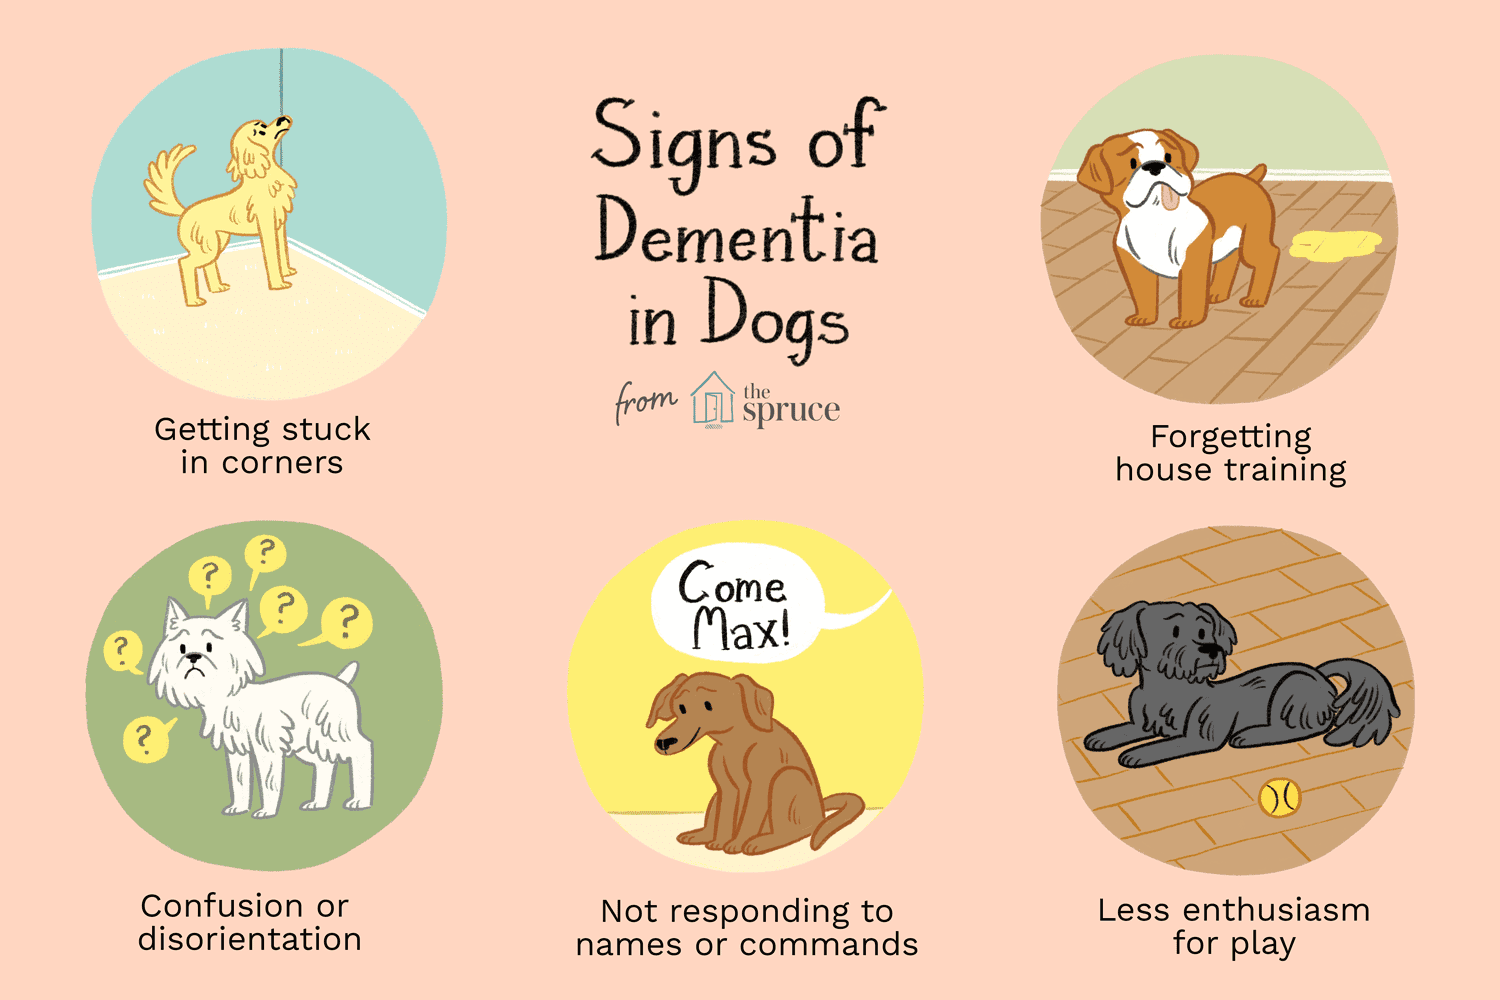 How to Treat Dementia and Senility in Dogs